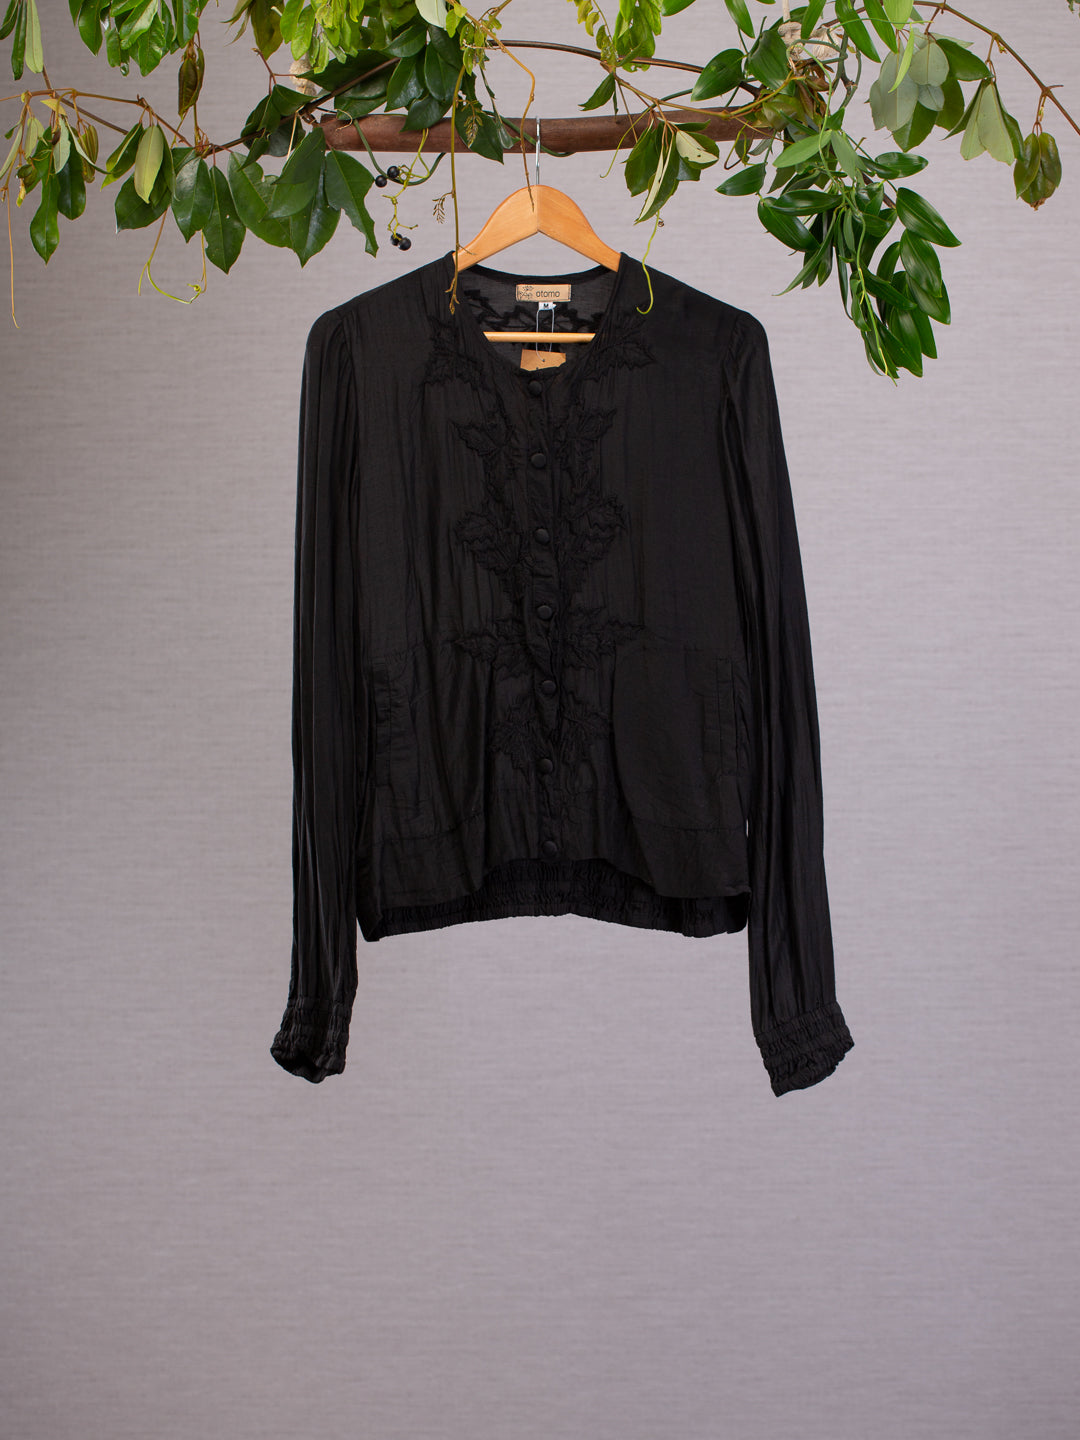 This light weight black silk jacket is subtlety embroidered around the fabric covered buttons. The comfortable fit is finished with an elasticised waist and cuffs, and also boasts with practical pockets.